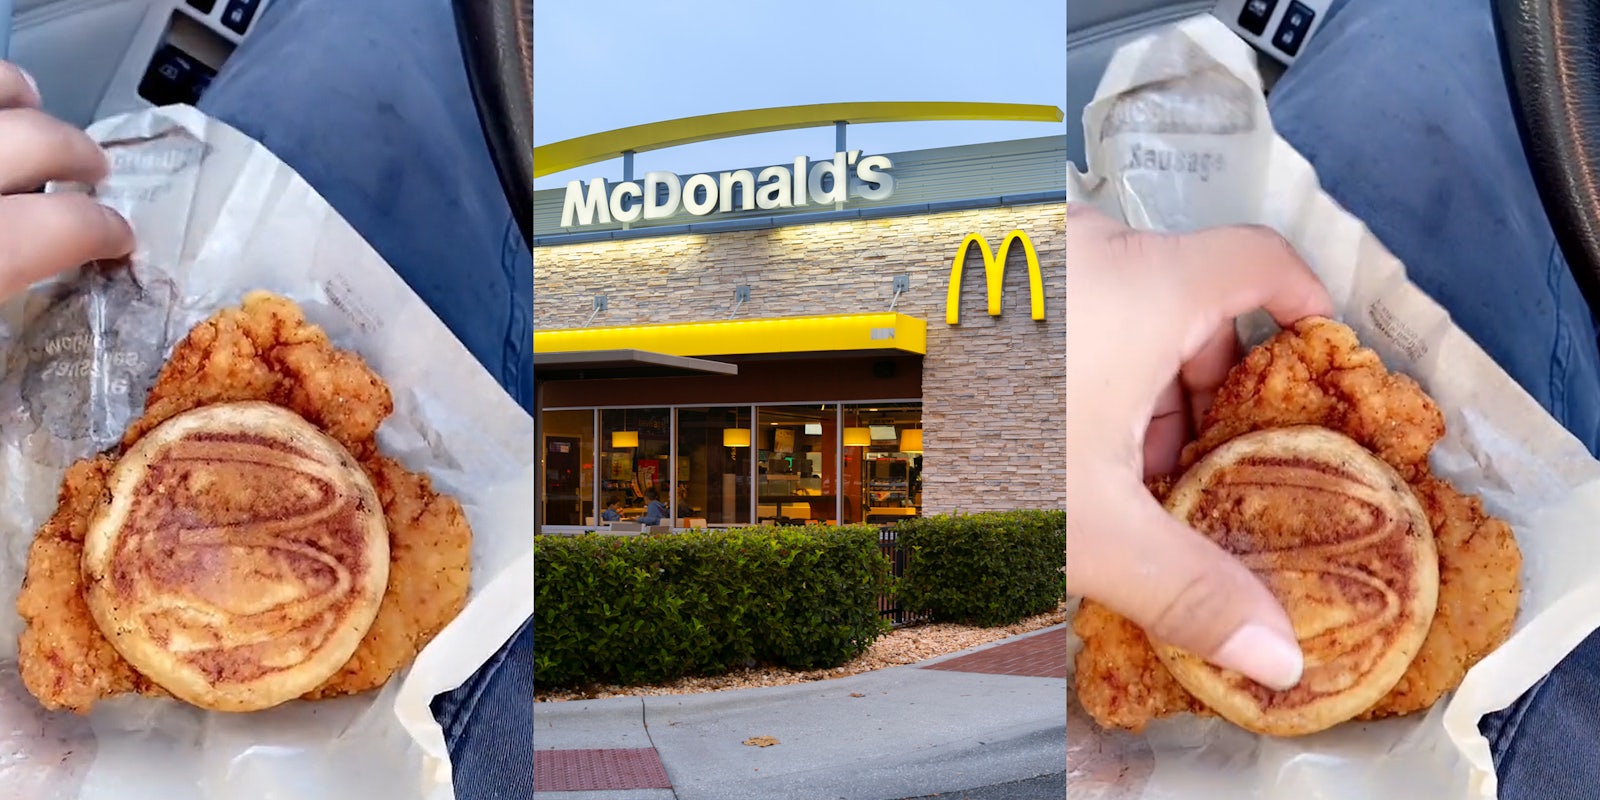 McGriddle with chicken inside on wrapper on person's lap in car (l) McDonald's building with sign (c) hand on McGriddle with chicken inside on wrapper on person's lap in car (r)